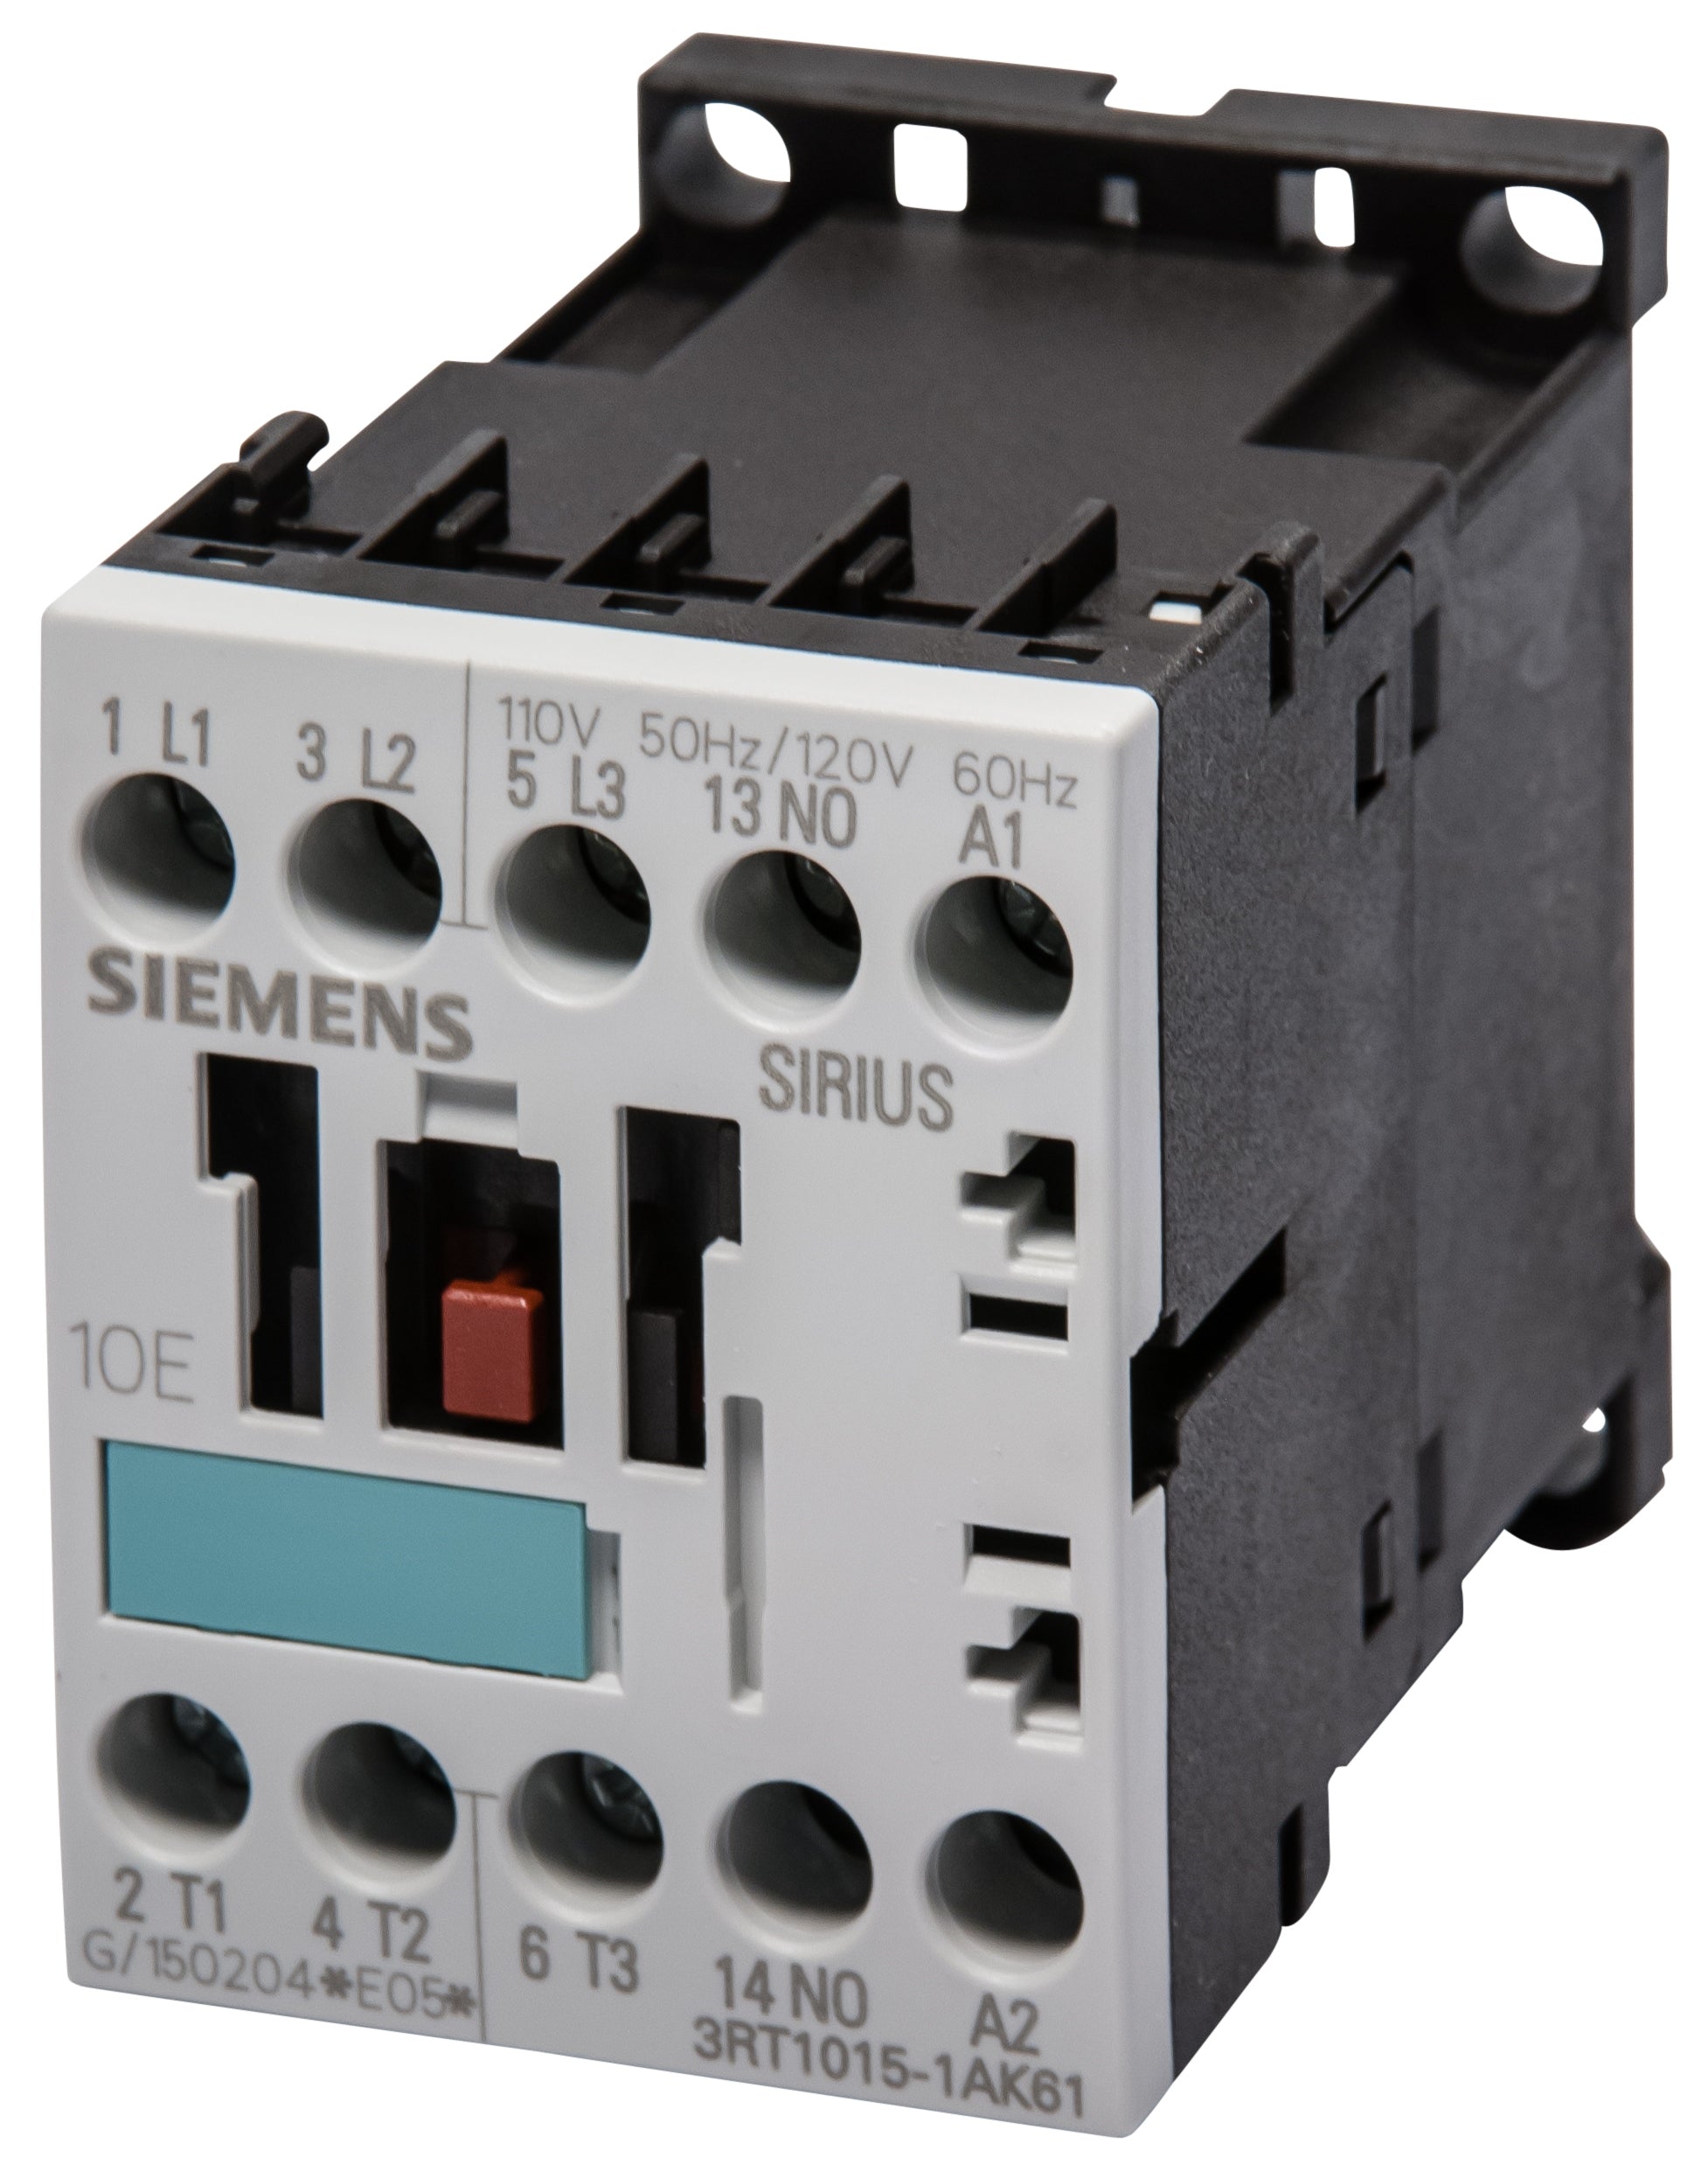 120V AC Contactor 3RT1026-1AK61 Directly replace for Siemens Contactor 3RT1026 